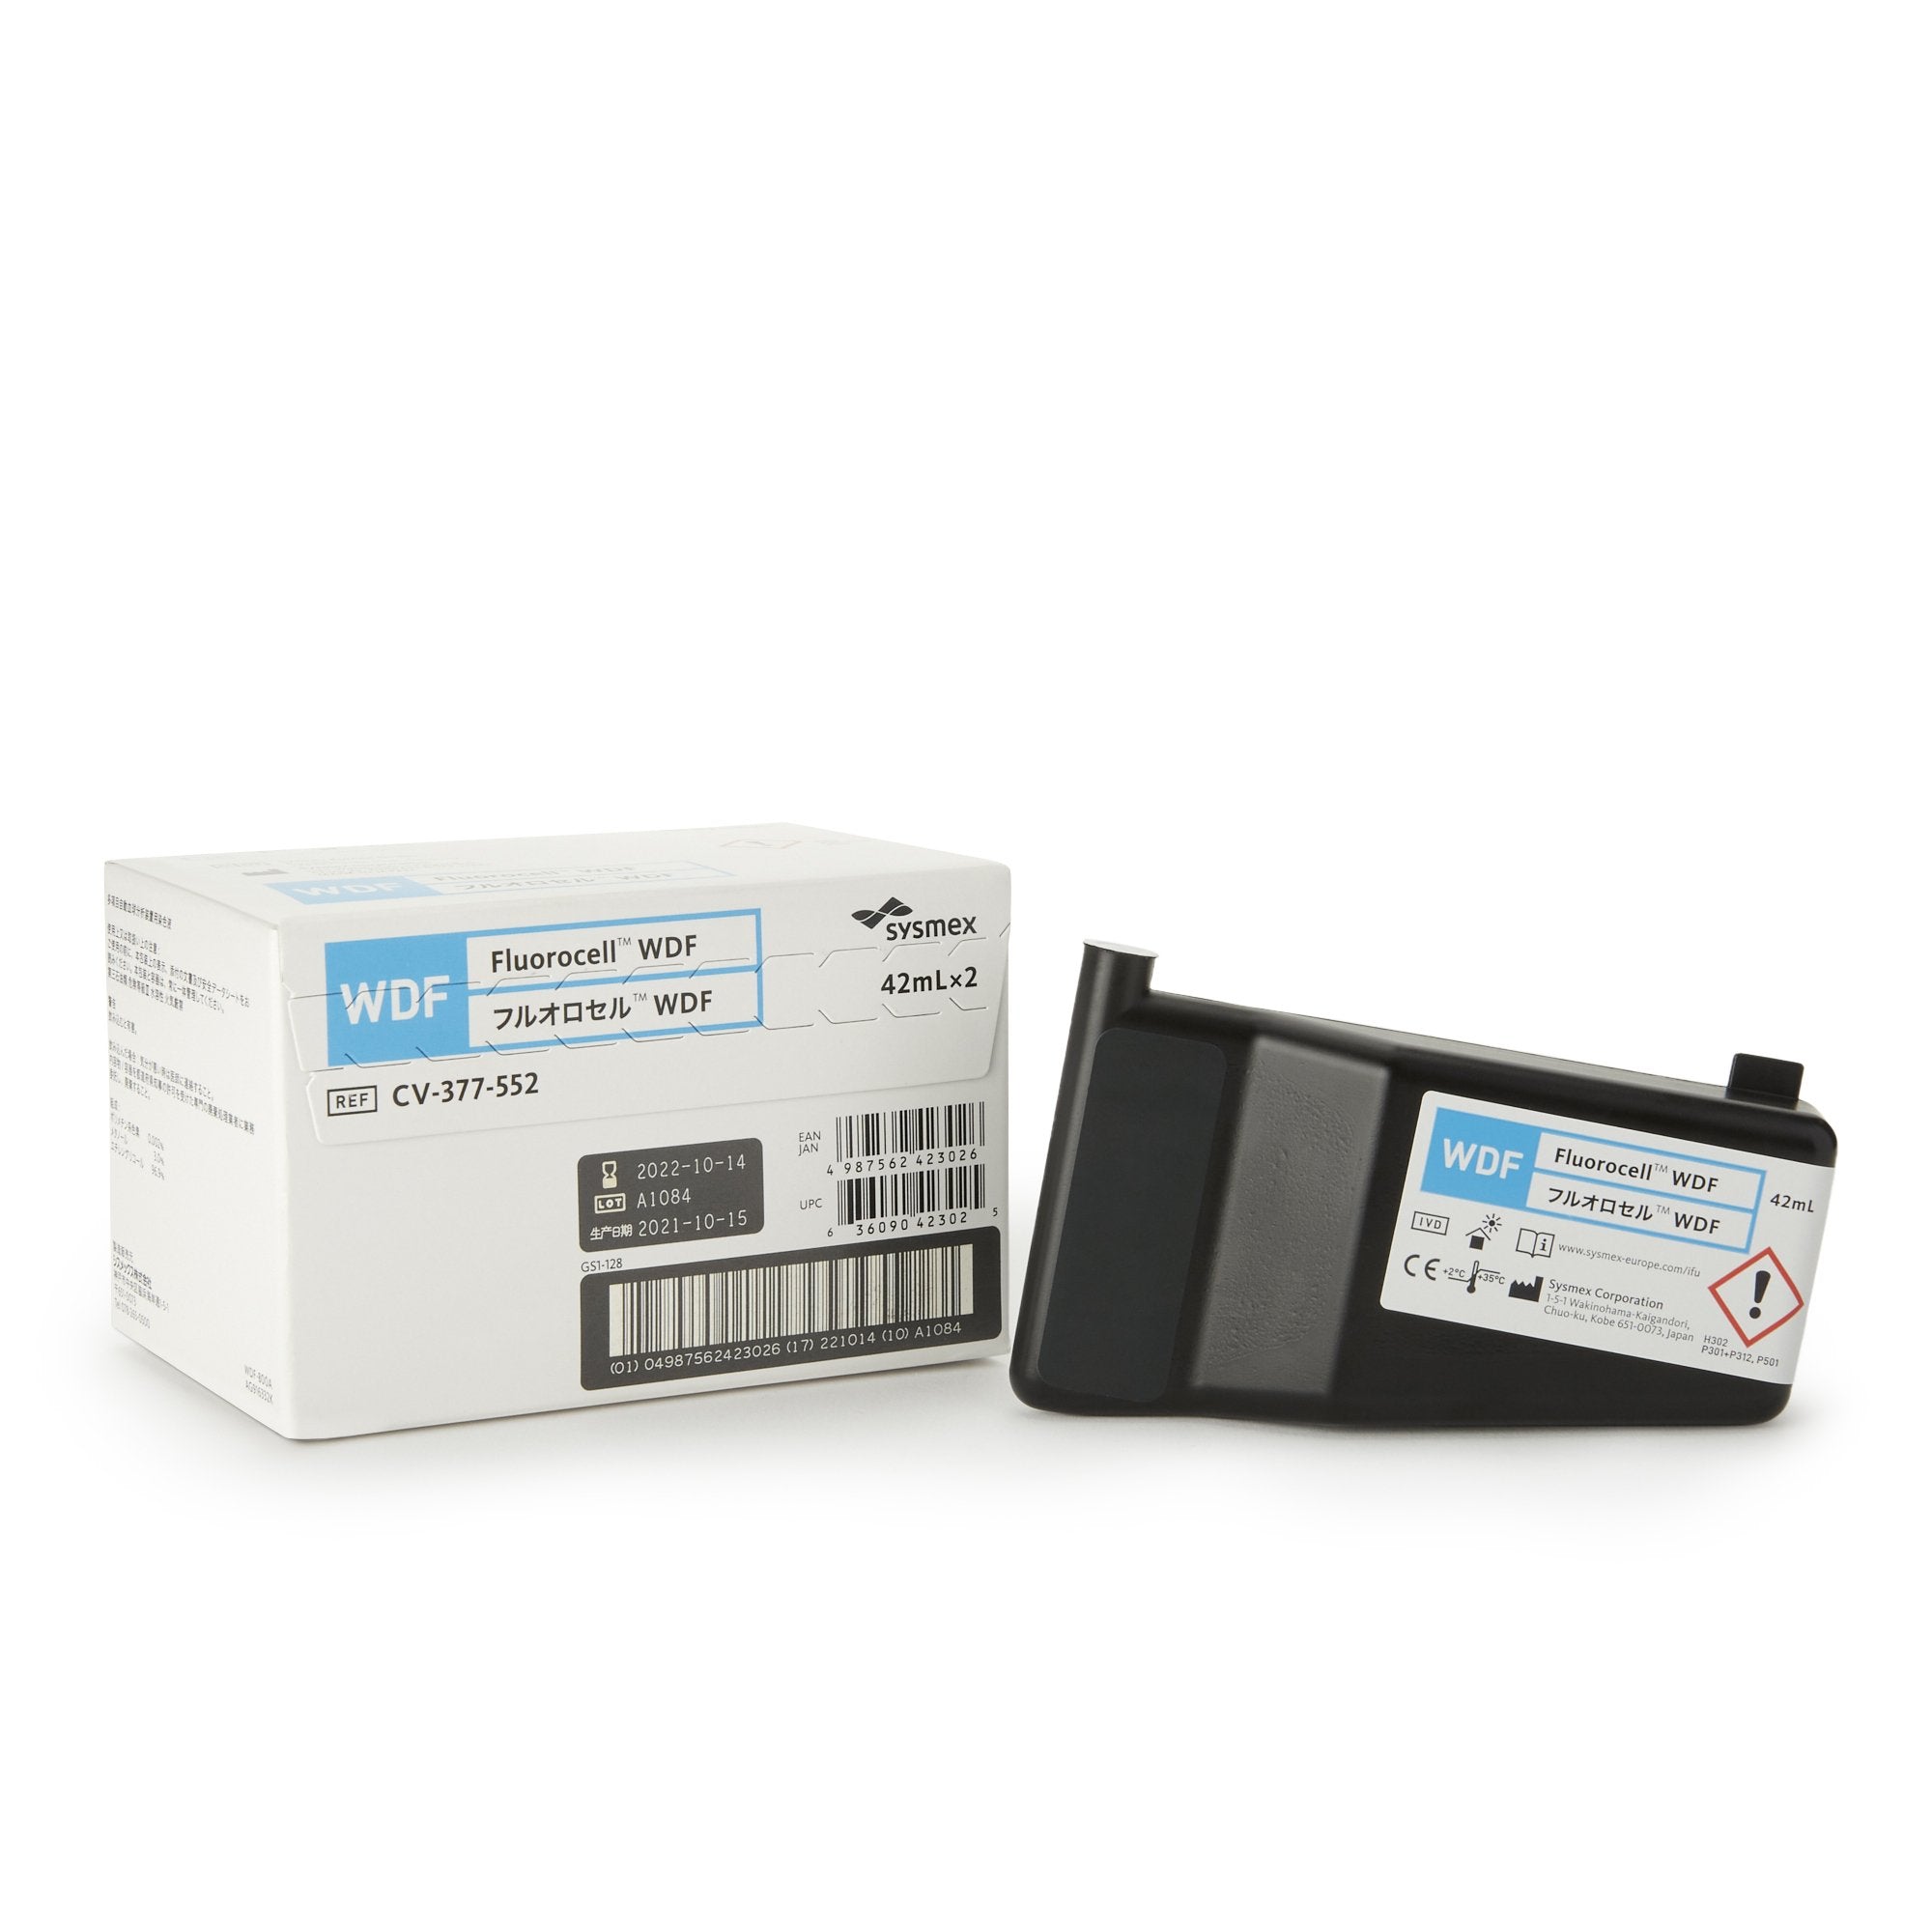 Fluorocell™ WDF Reagent for use with Sysmex Automated Hematology Analyzers | Box-2 | 1195265_BX